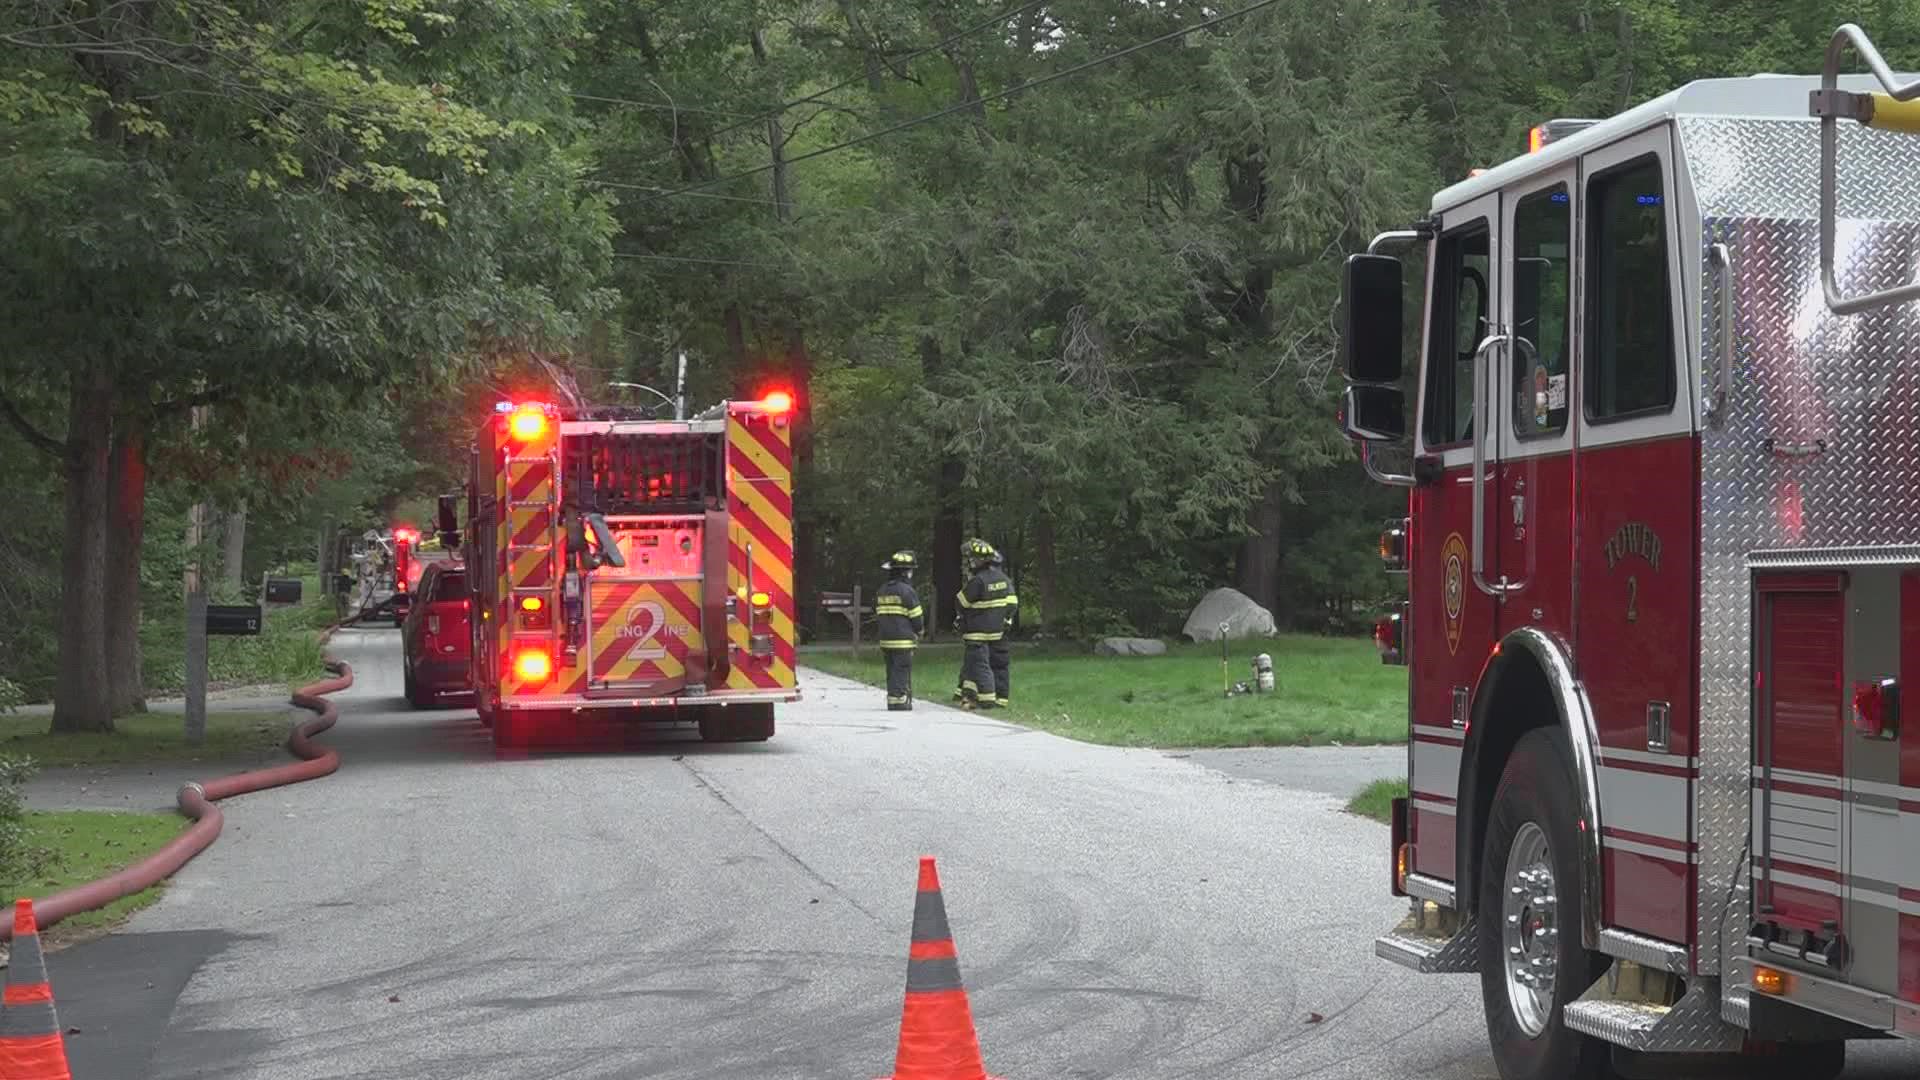 Officials say landscapers ran over an in-ground tank, spewing gas into the air.